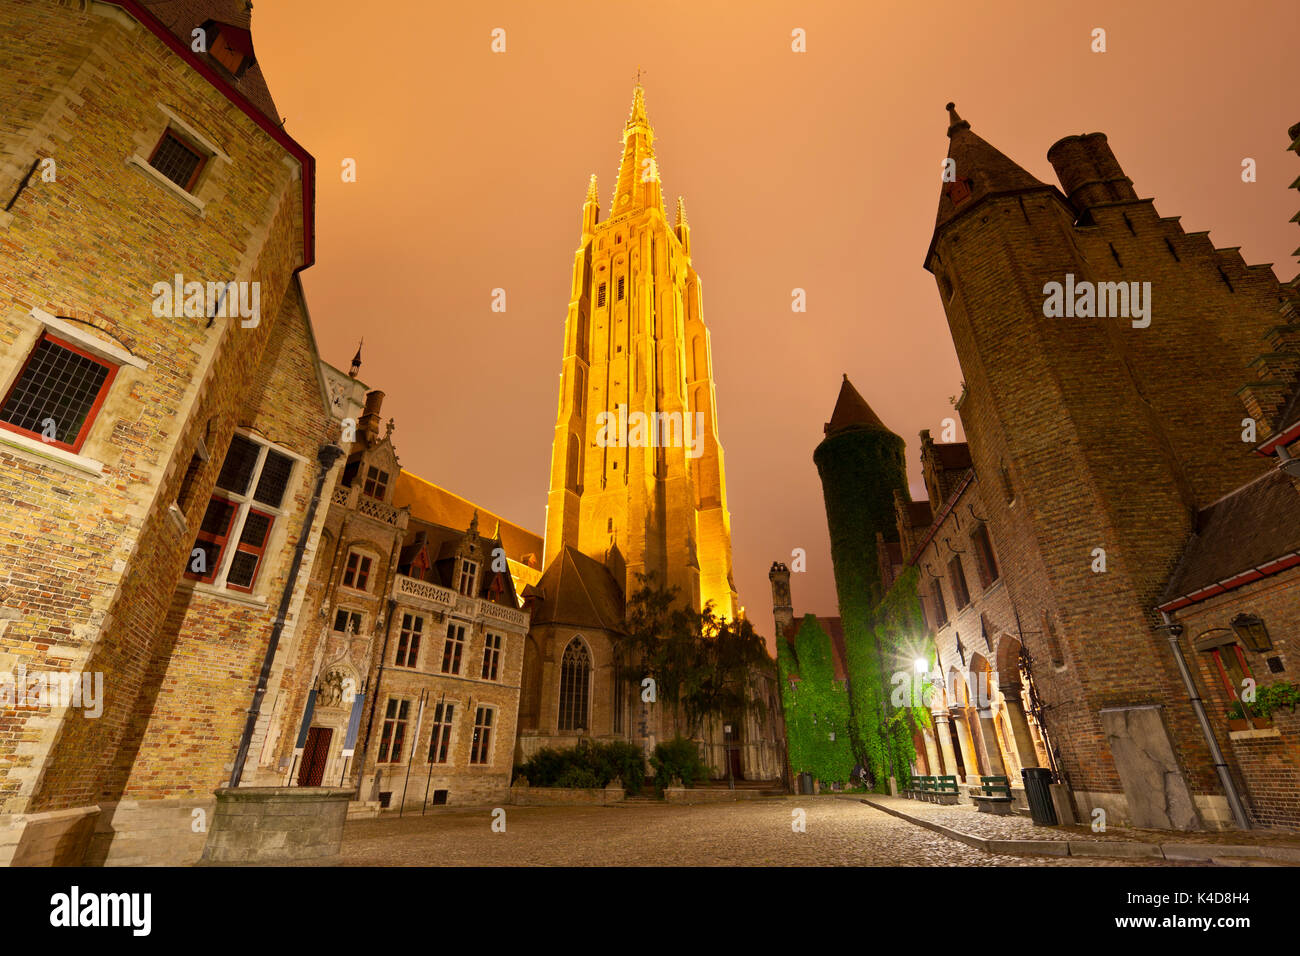 View to the illuminated tower of the Church Of Our Lady in Bruges at night with the Gruuthuse Museum buildings as foreground. Stock Photo